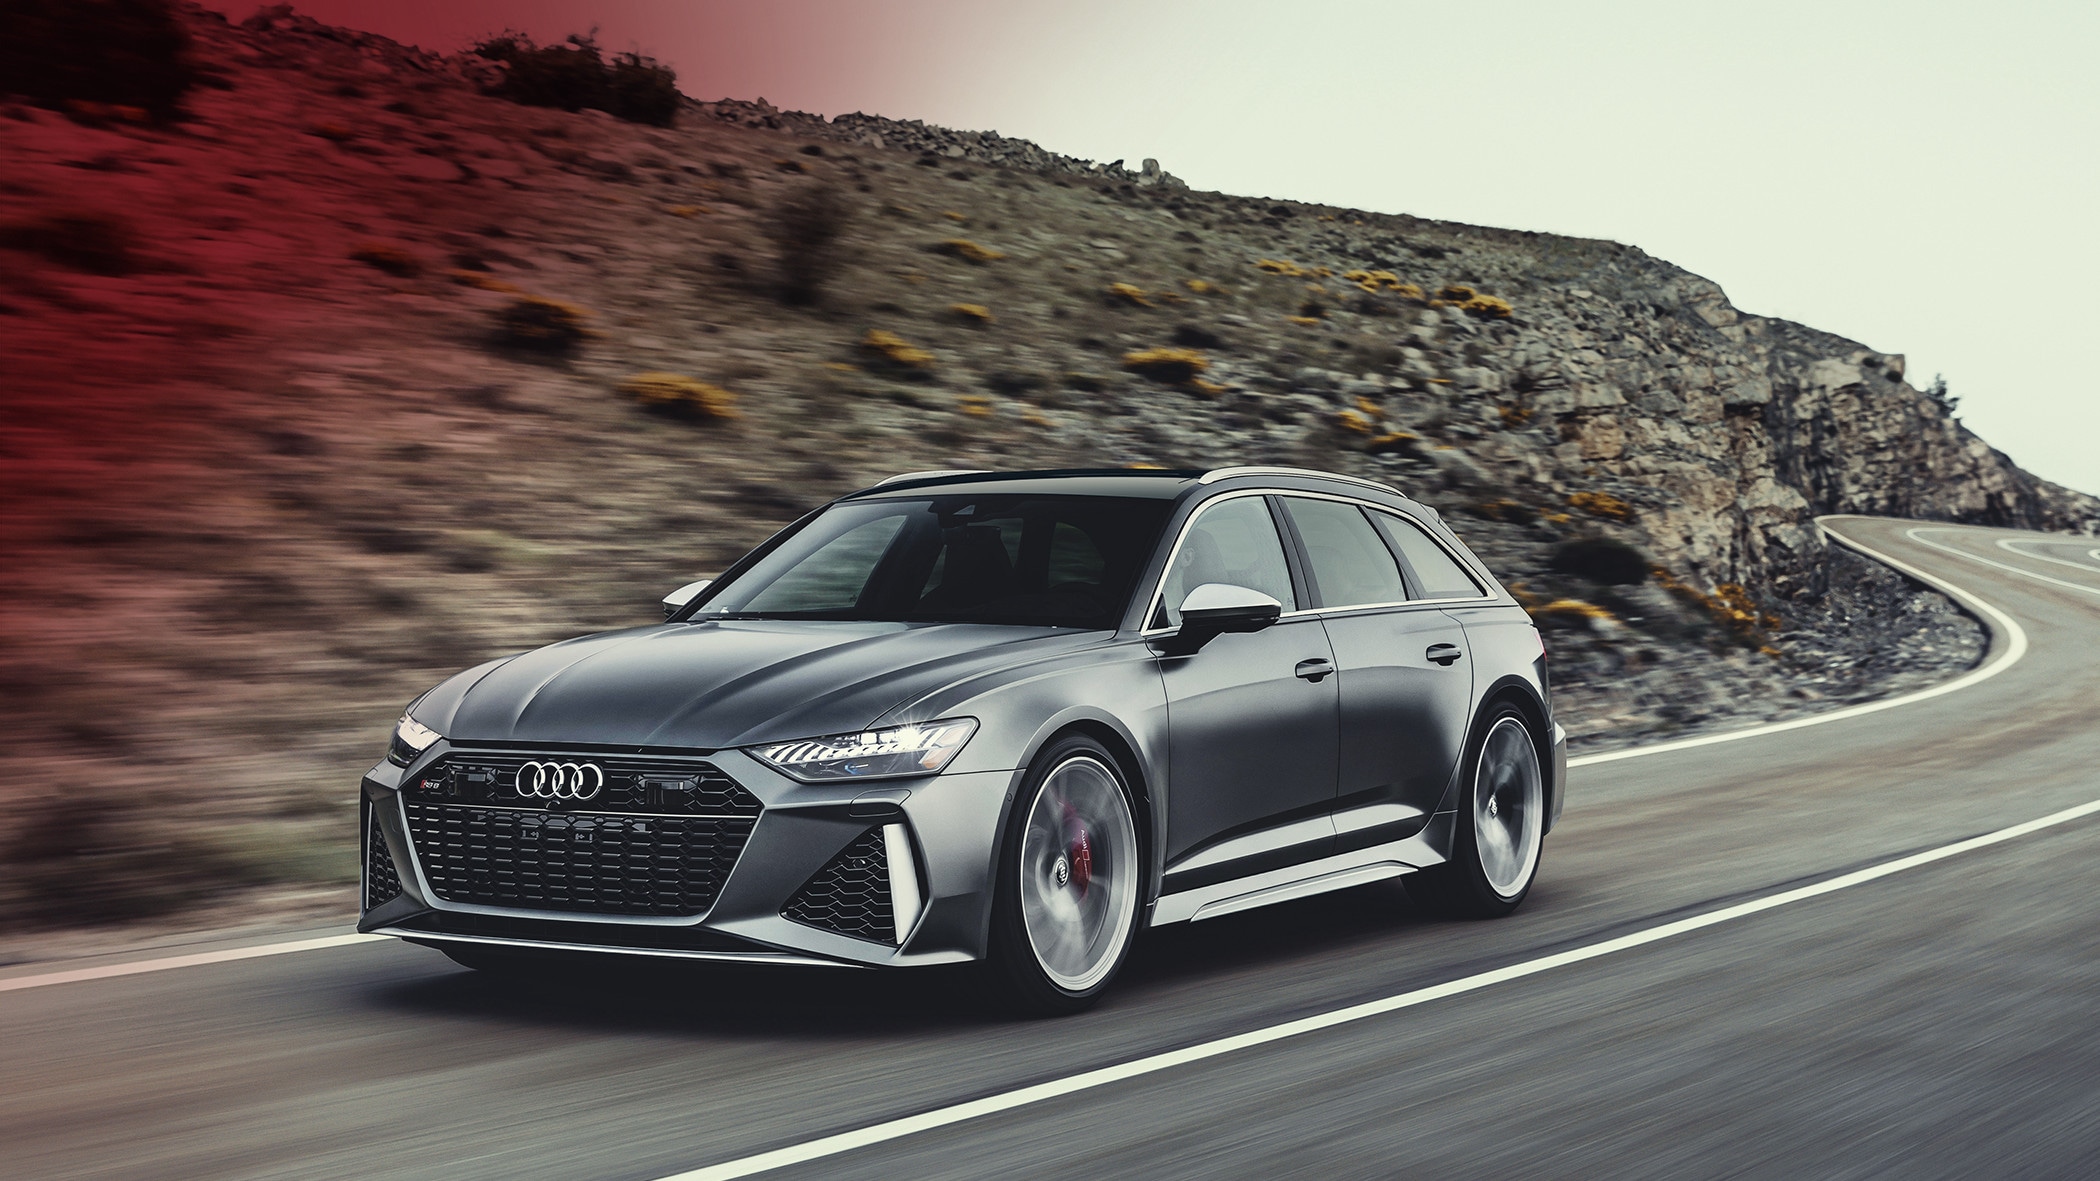 ABT has transformed Audi RS6 into a hybrid road legal 